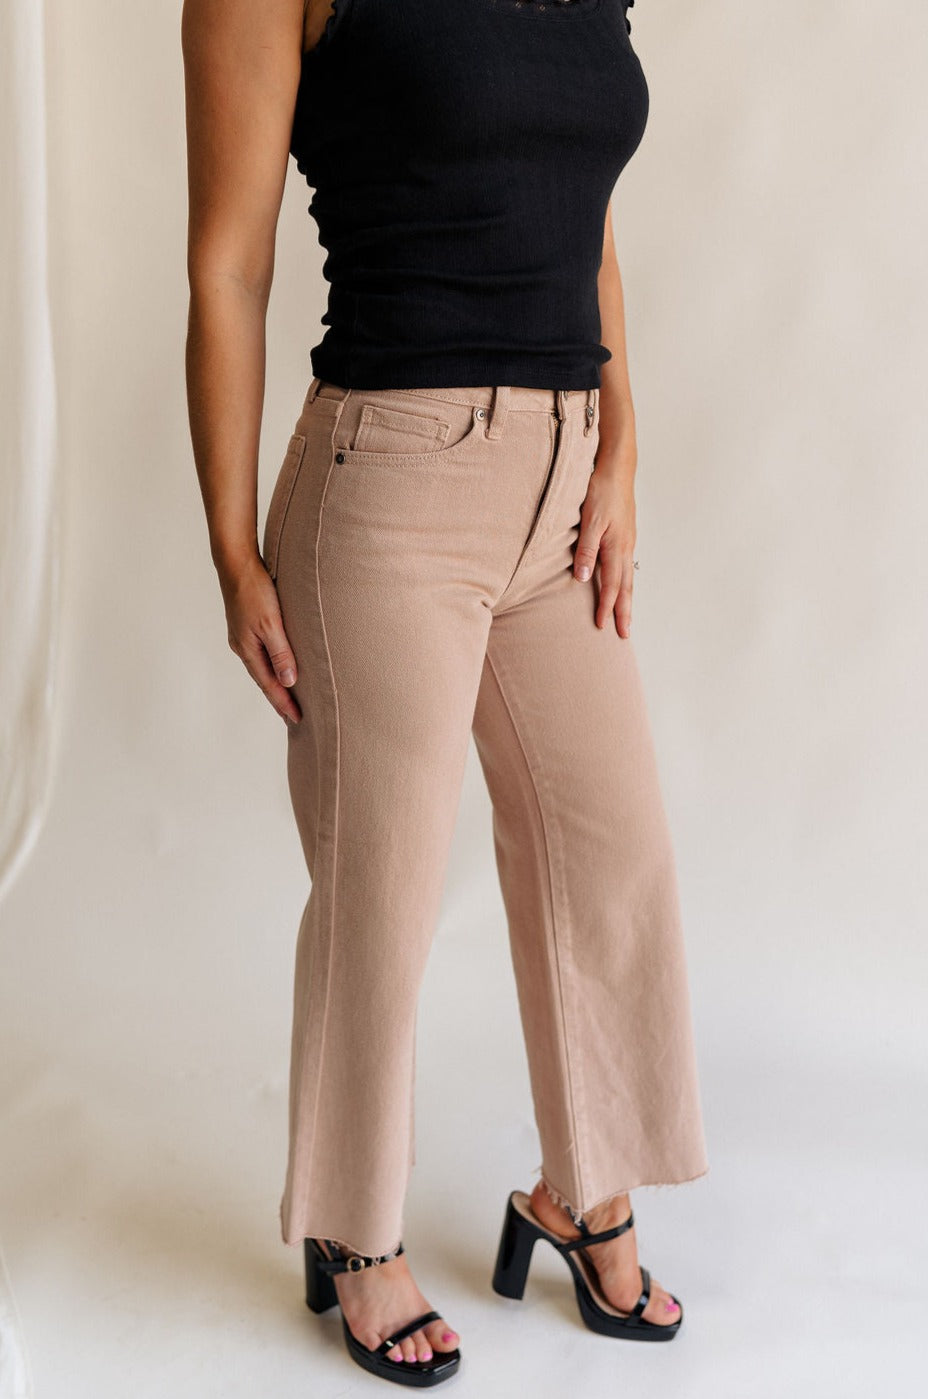 Side view of female model wearing the Lena Light Taupe Wide Cropped Leg Pants which features Light Taupe Denim Fabric, Wide Pant Leg, Raw Hem, Front Zipper with Button Closure, Two Front Pockets, Two Back Pockets and Belt Loops